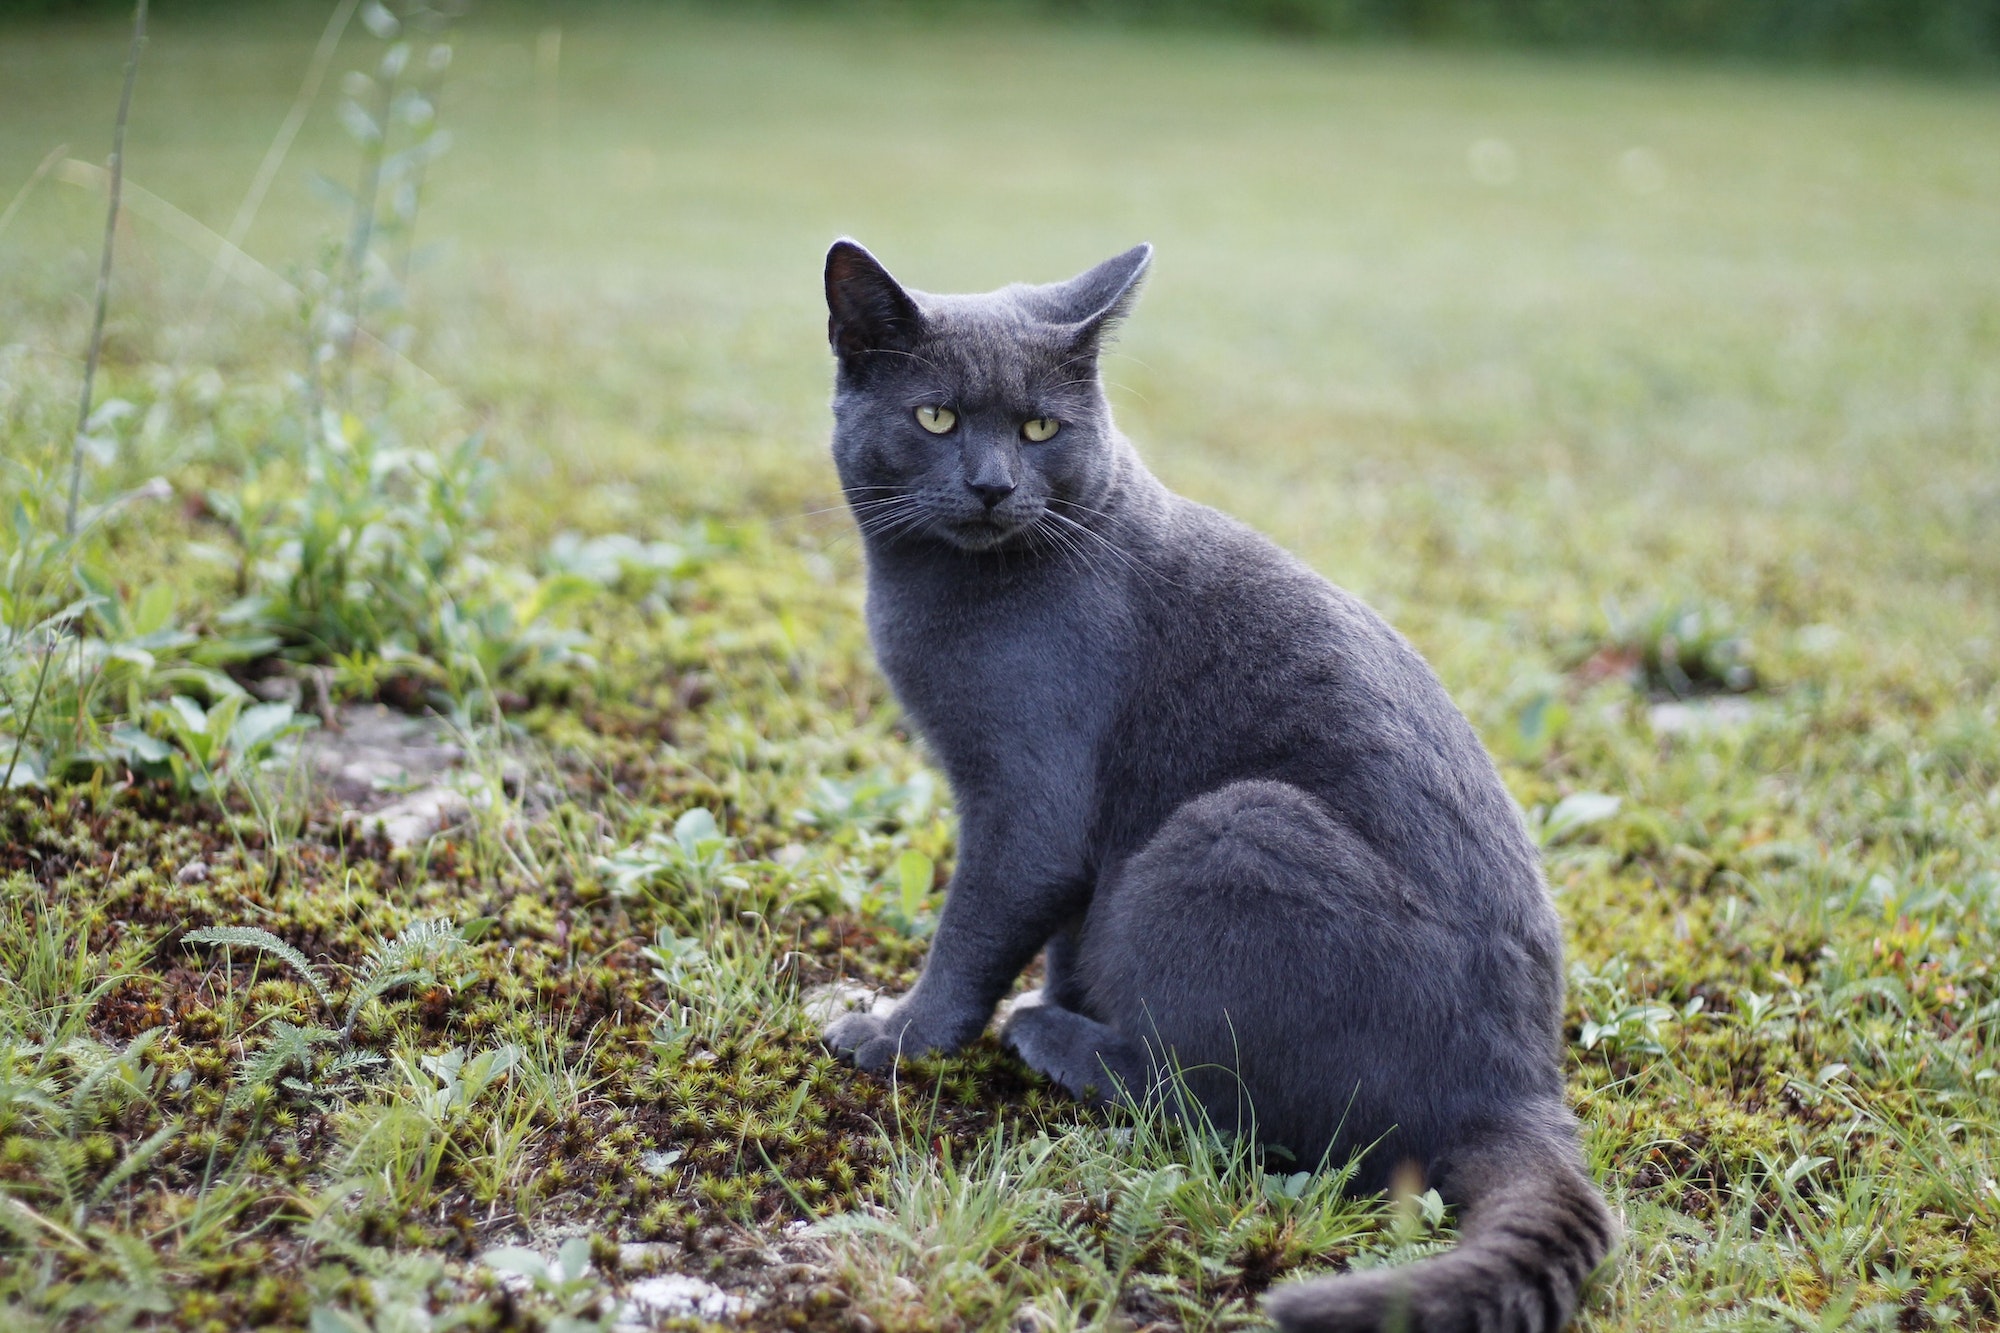 Closeup shot of a shorthair gray cat sitting on the grass in the park with blurred background